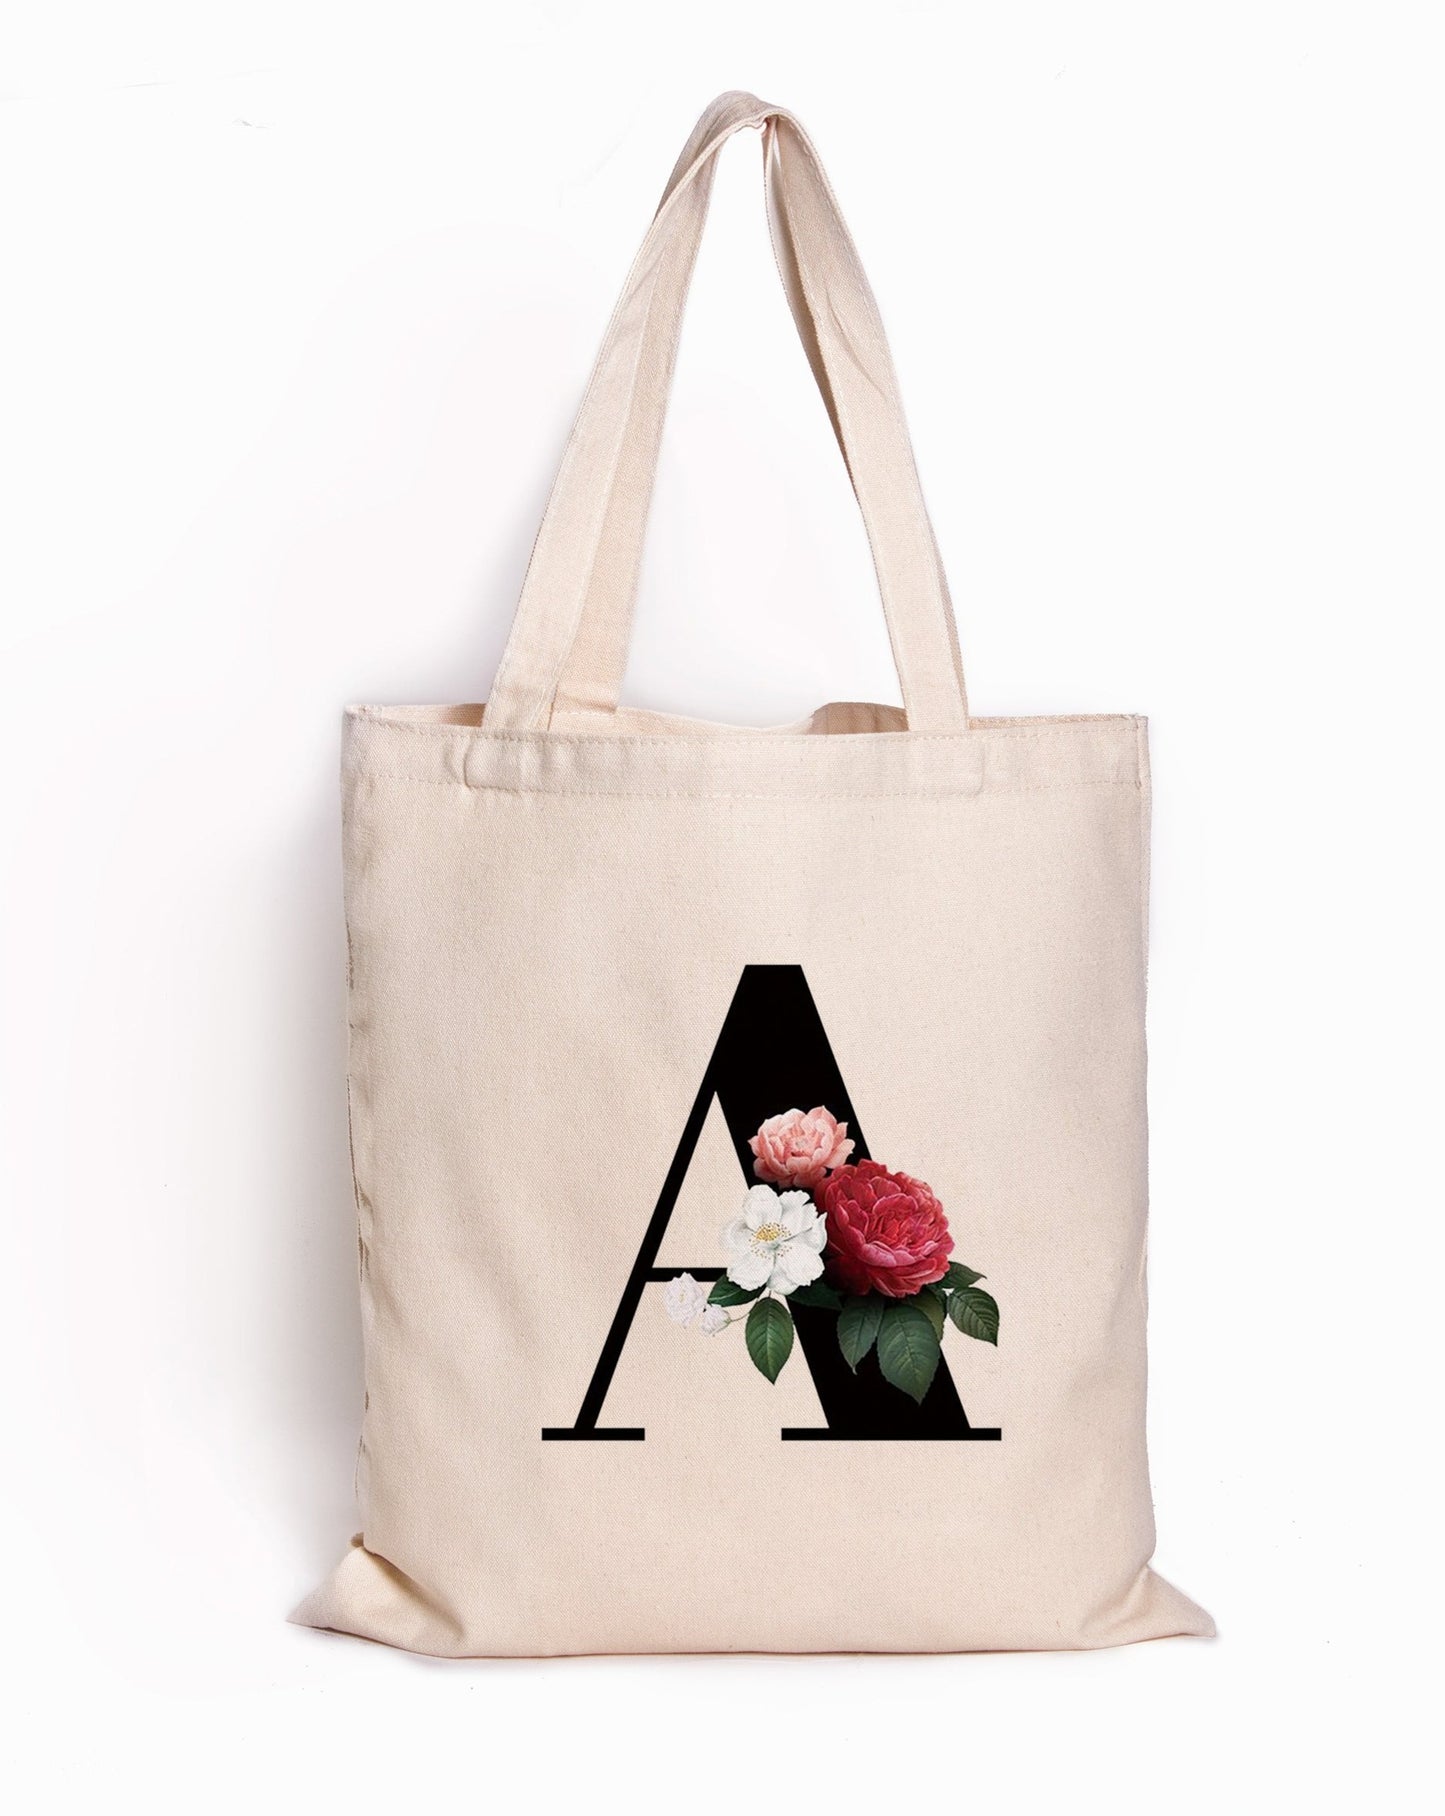 Personalized Bridesmaid Tote Bag Letter and Name style4